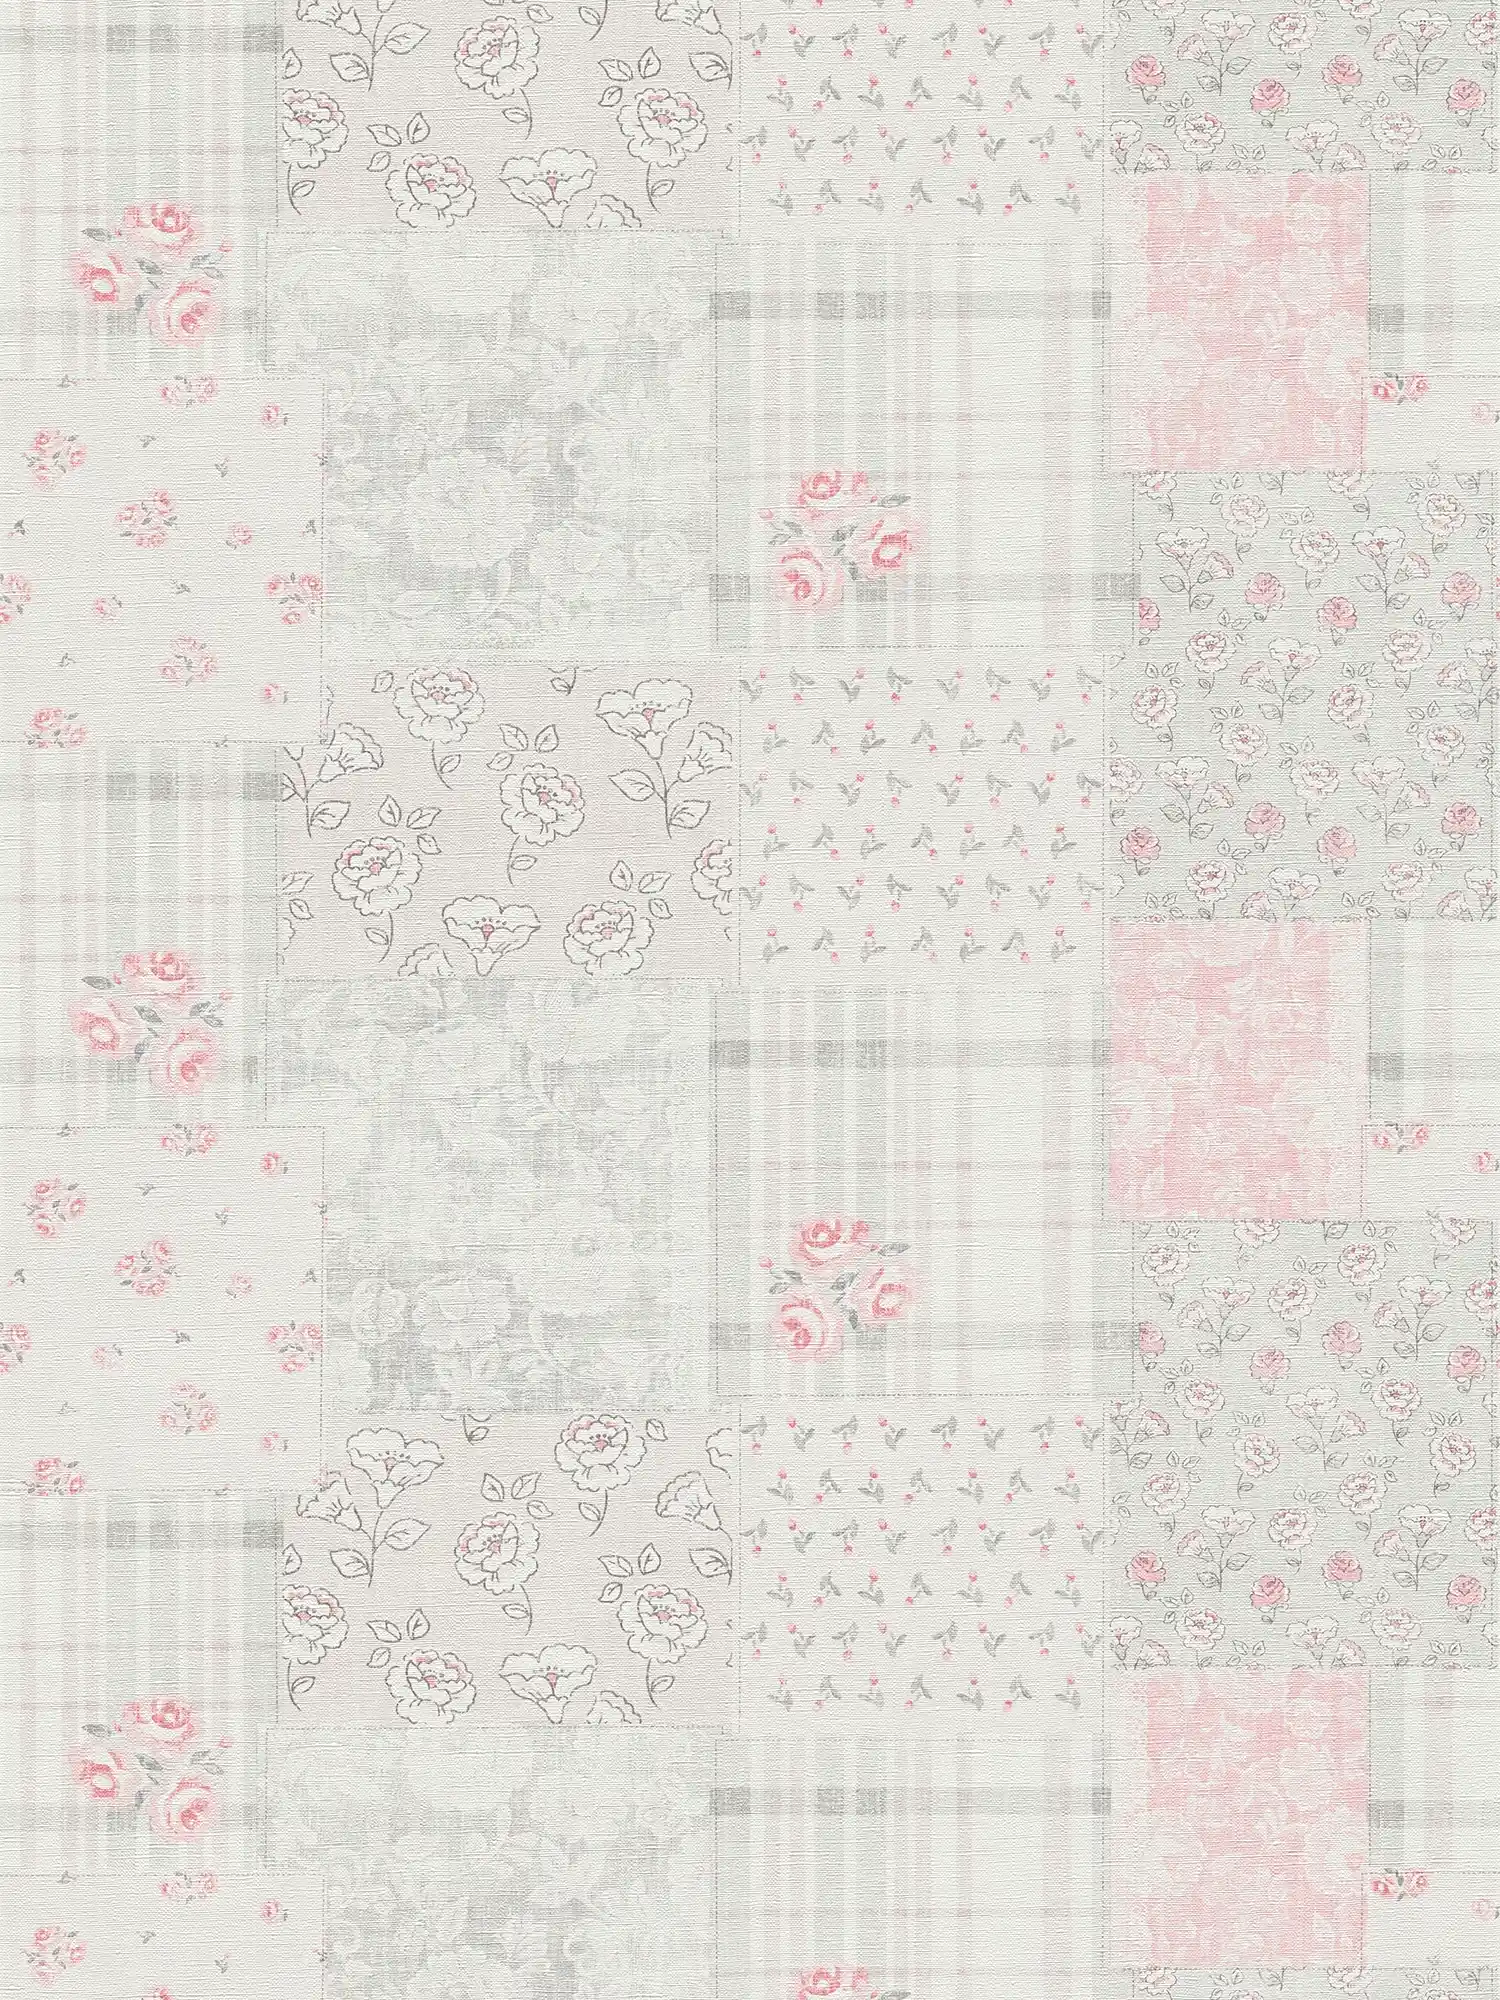 Wallpaper country house floral and chequered pattern - grey, red, white
